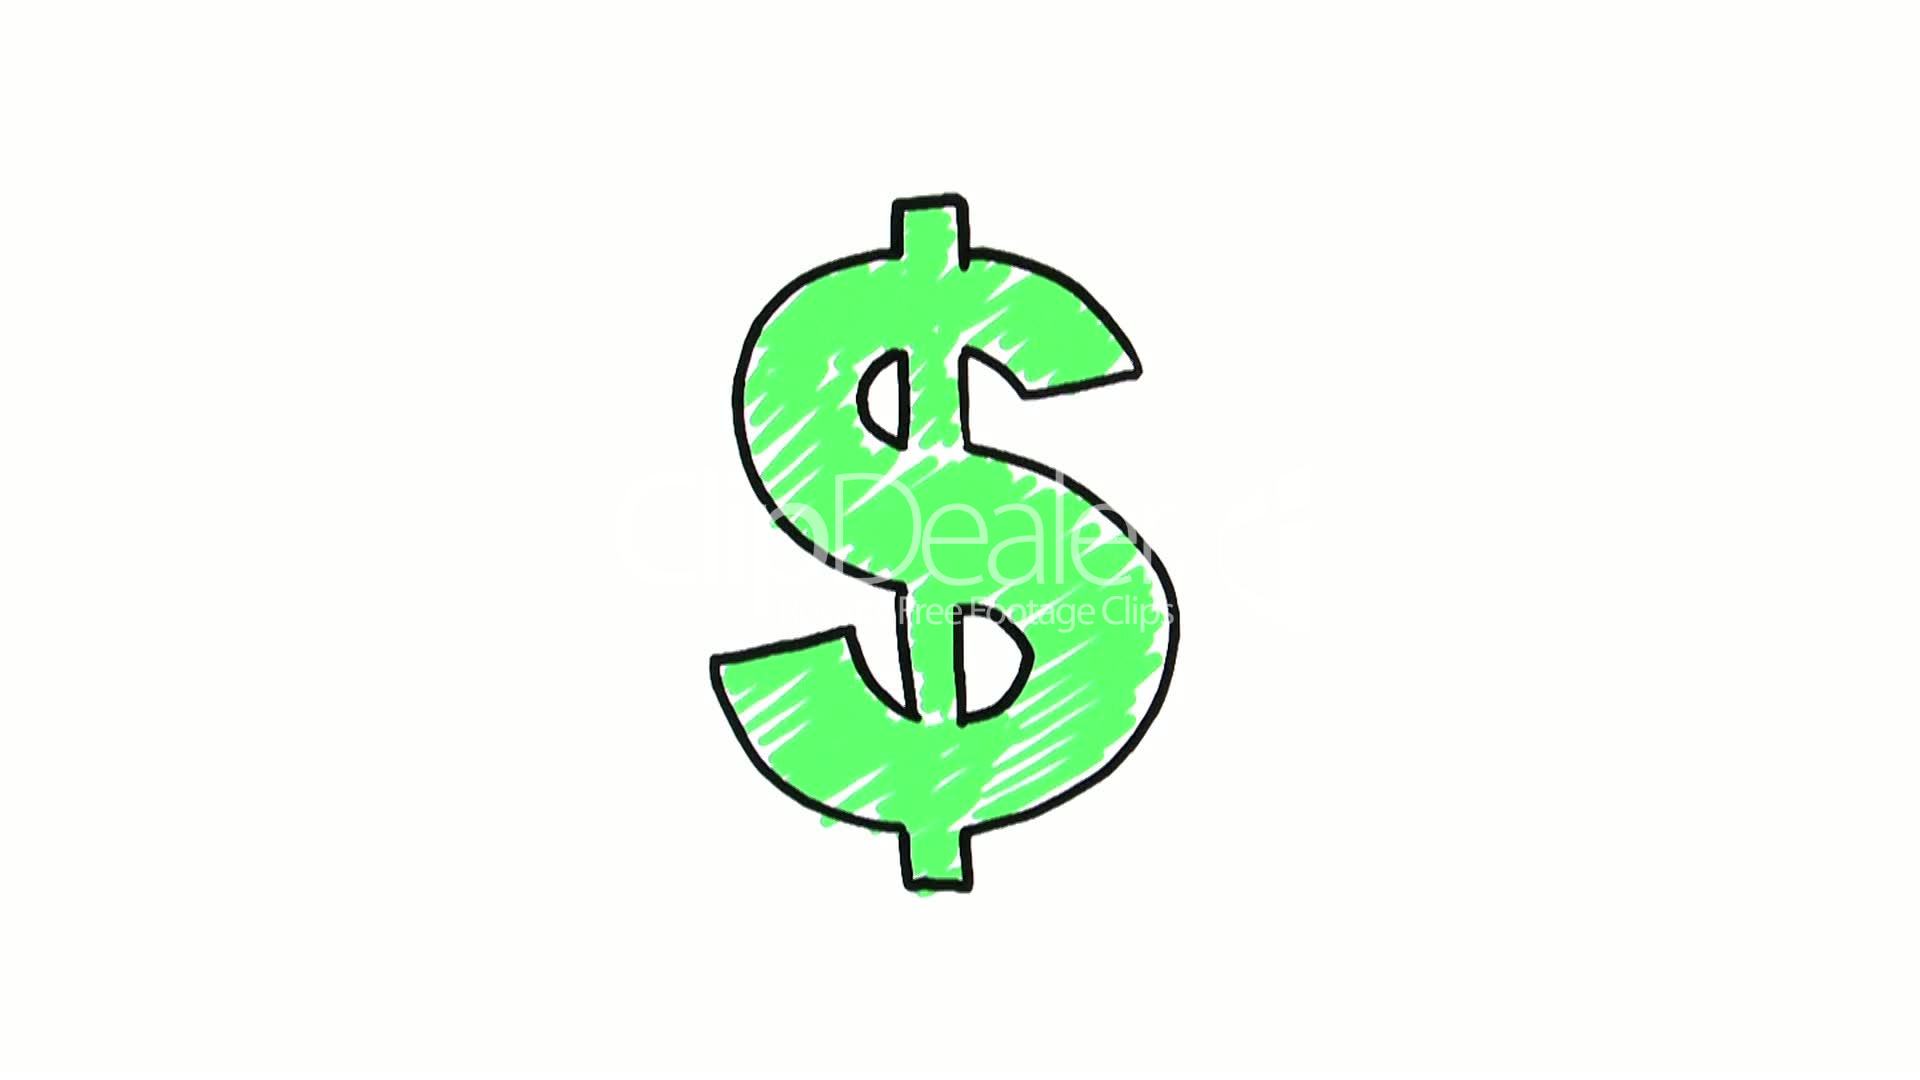 Dollar Sign Sketch: Royalty-free video and stock footage